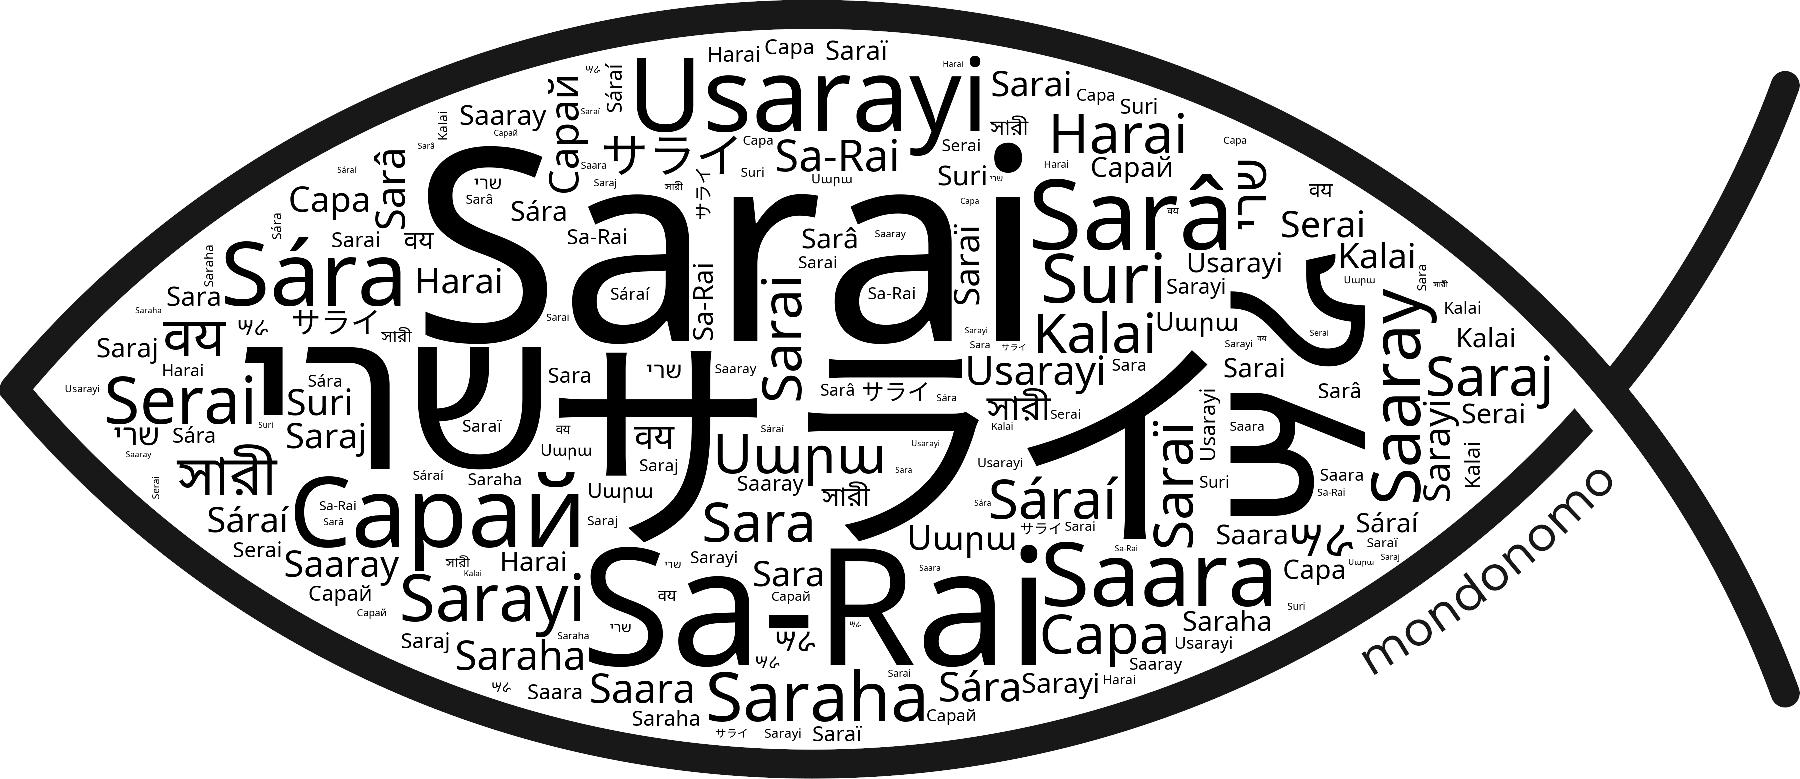 Name Sarai in the world's Bibles